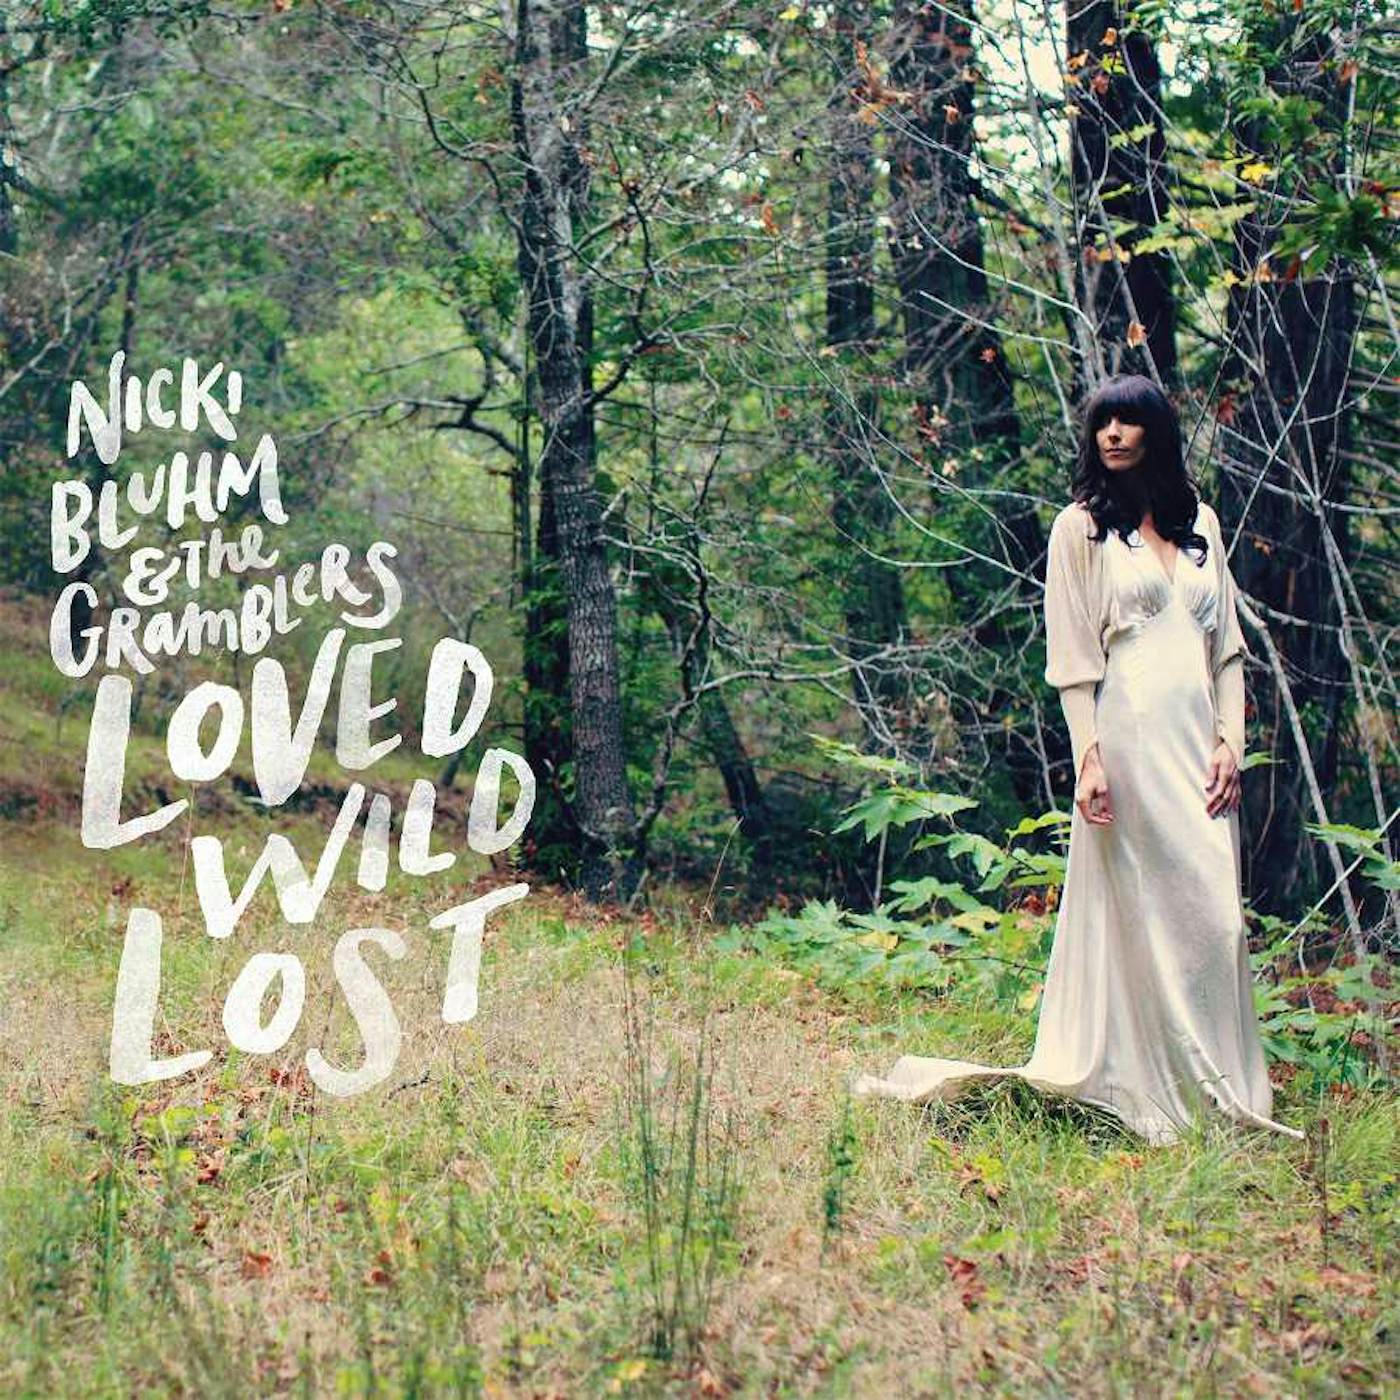 Nicki Bluhm and the Gramblers Loved Wild Lost Vinyl Record